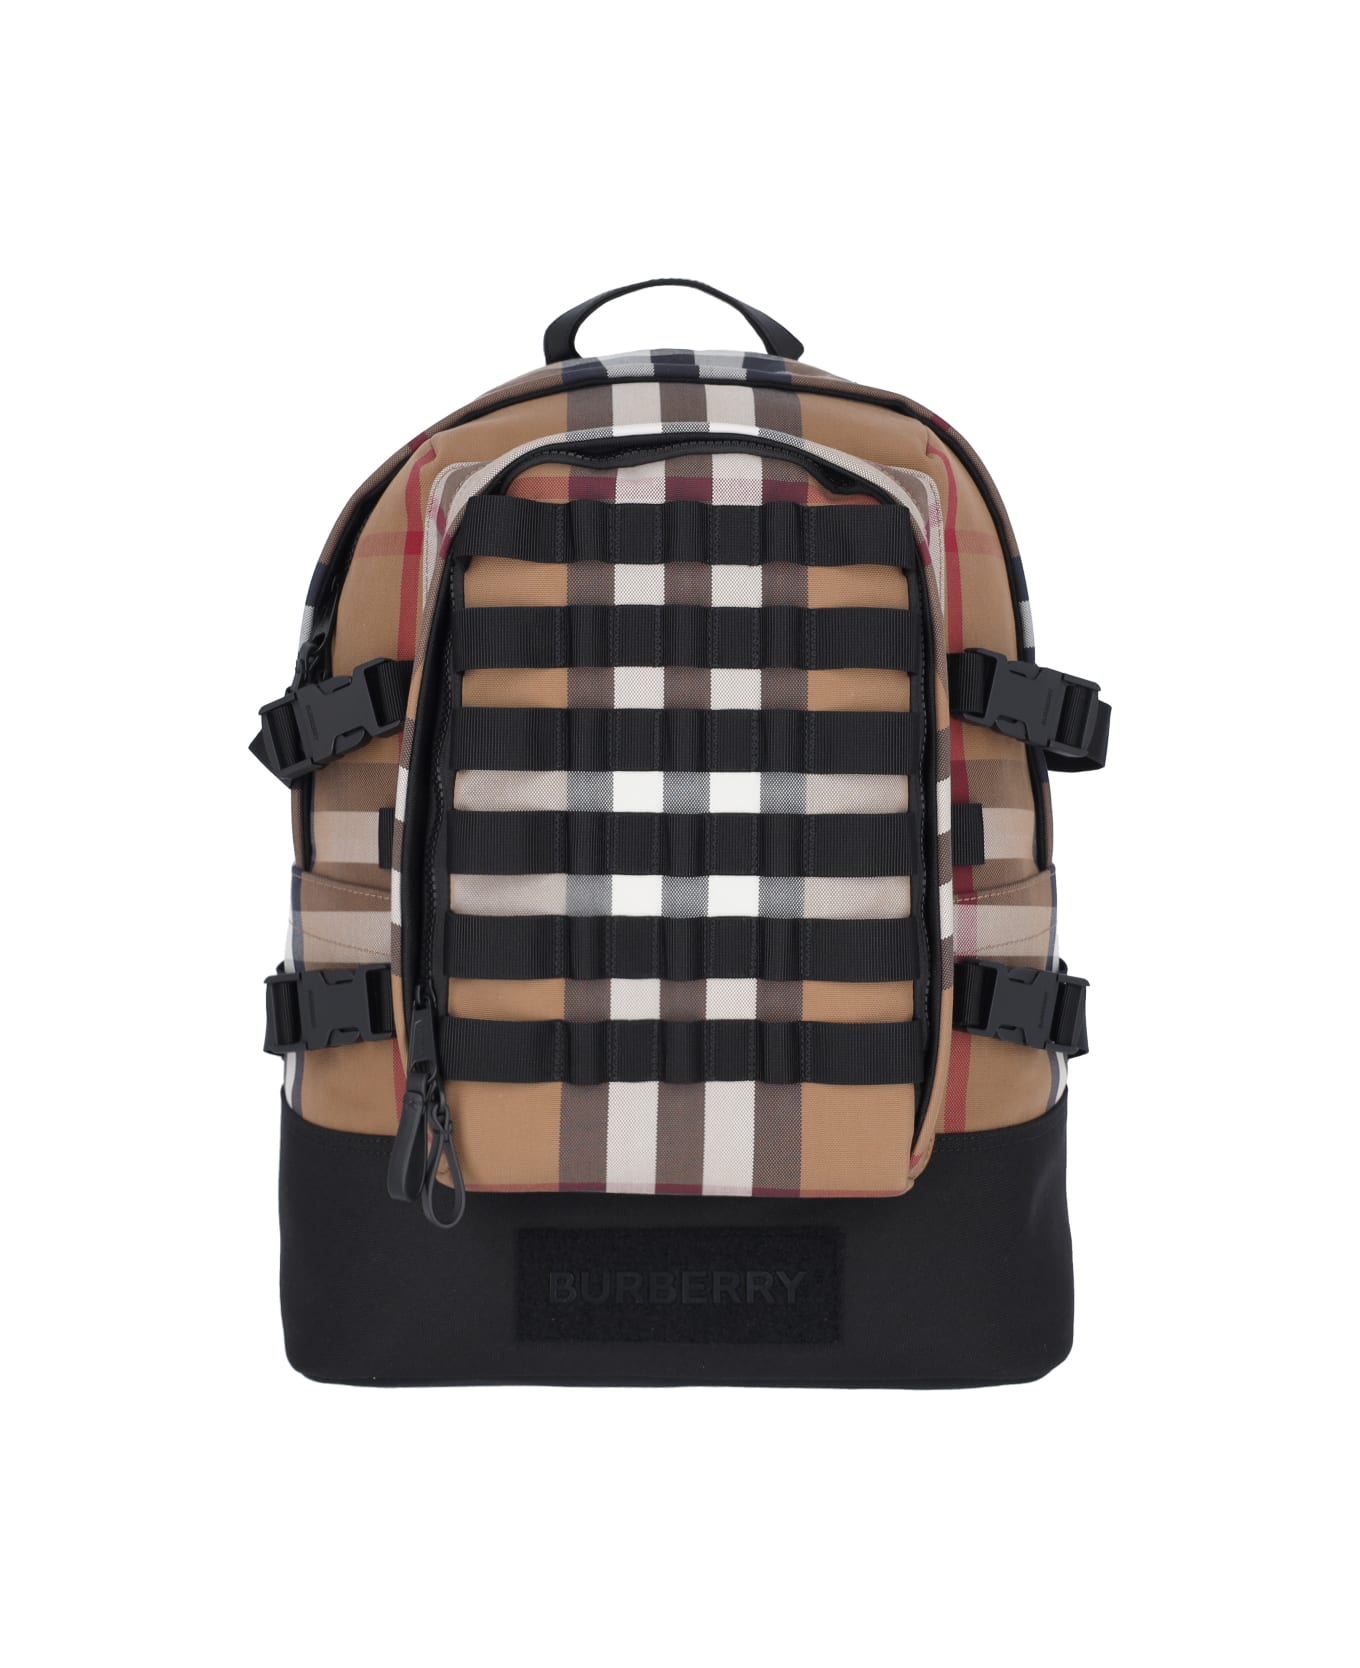 Burberry 'vintage Check' Backpack - Brown バックパック